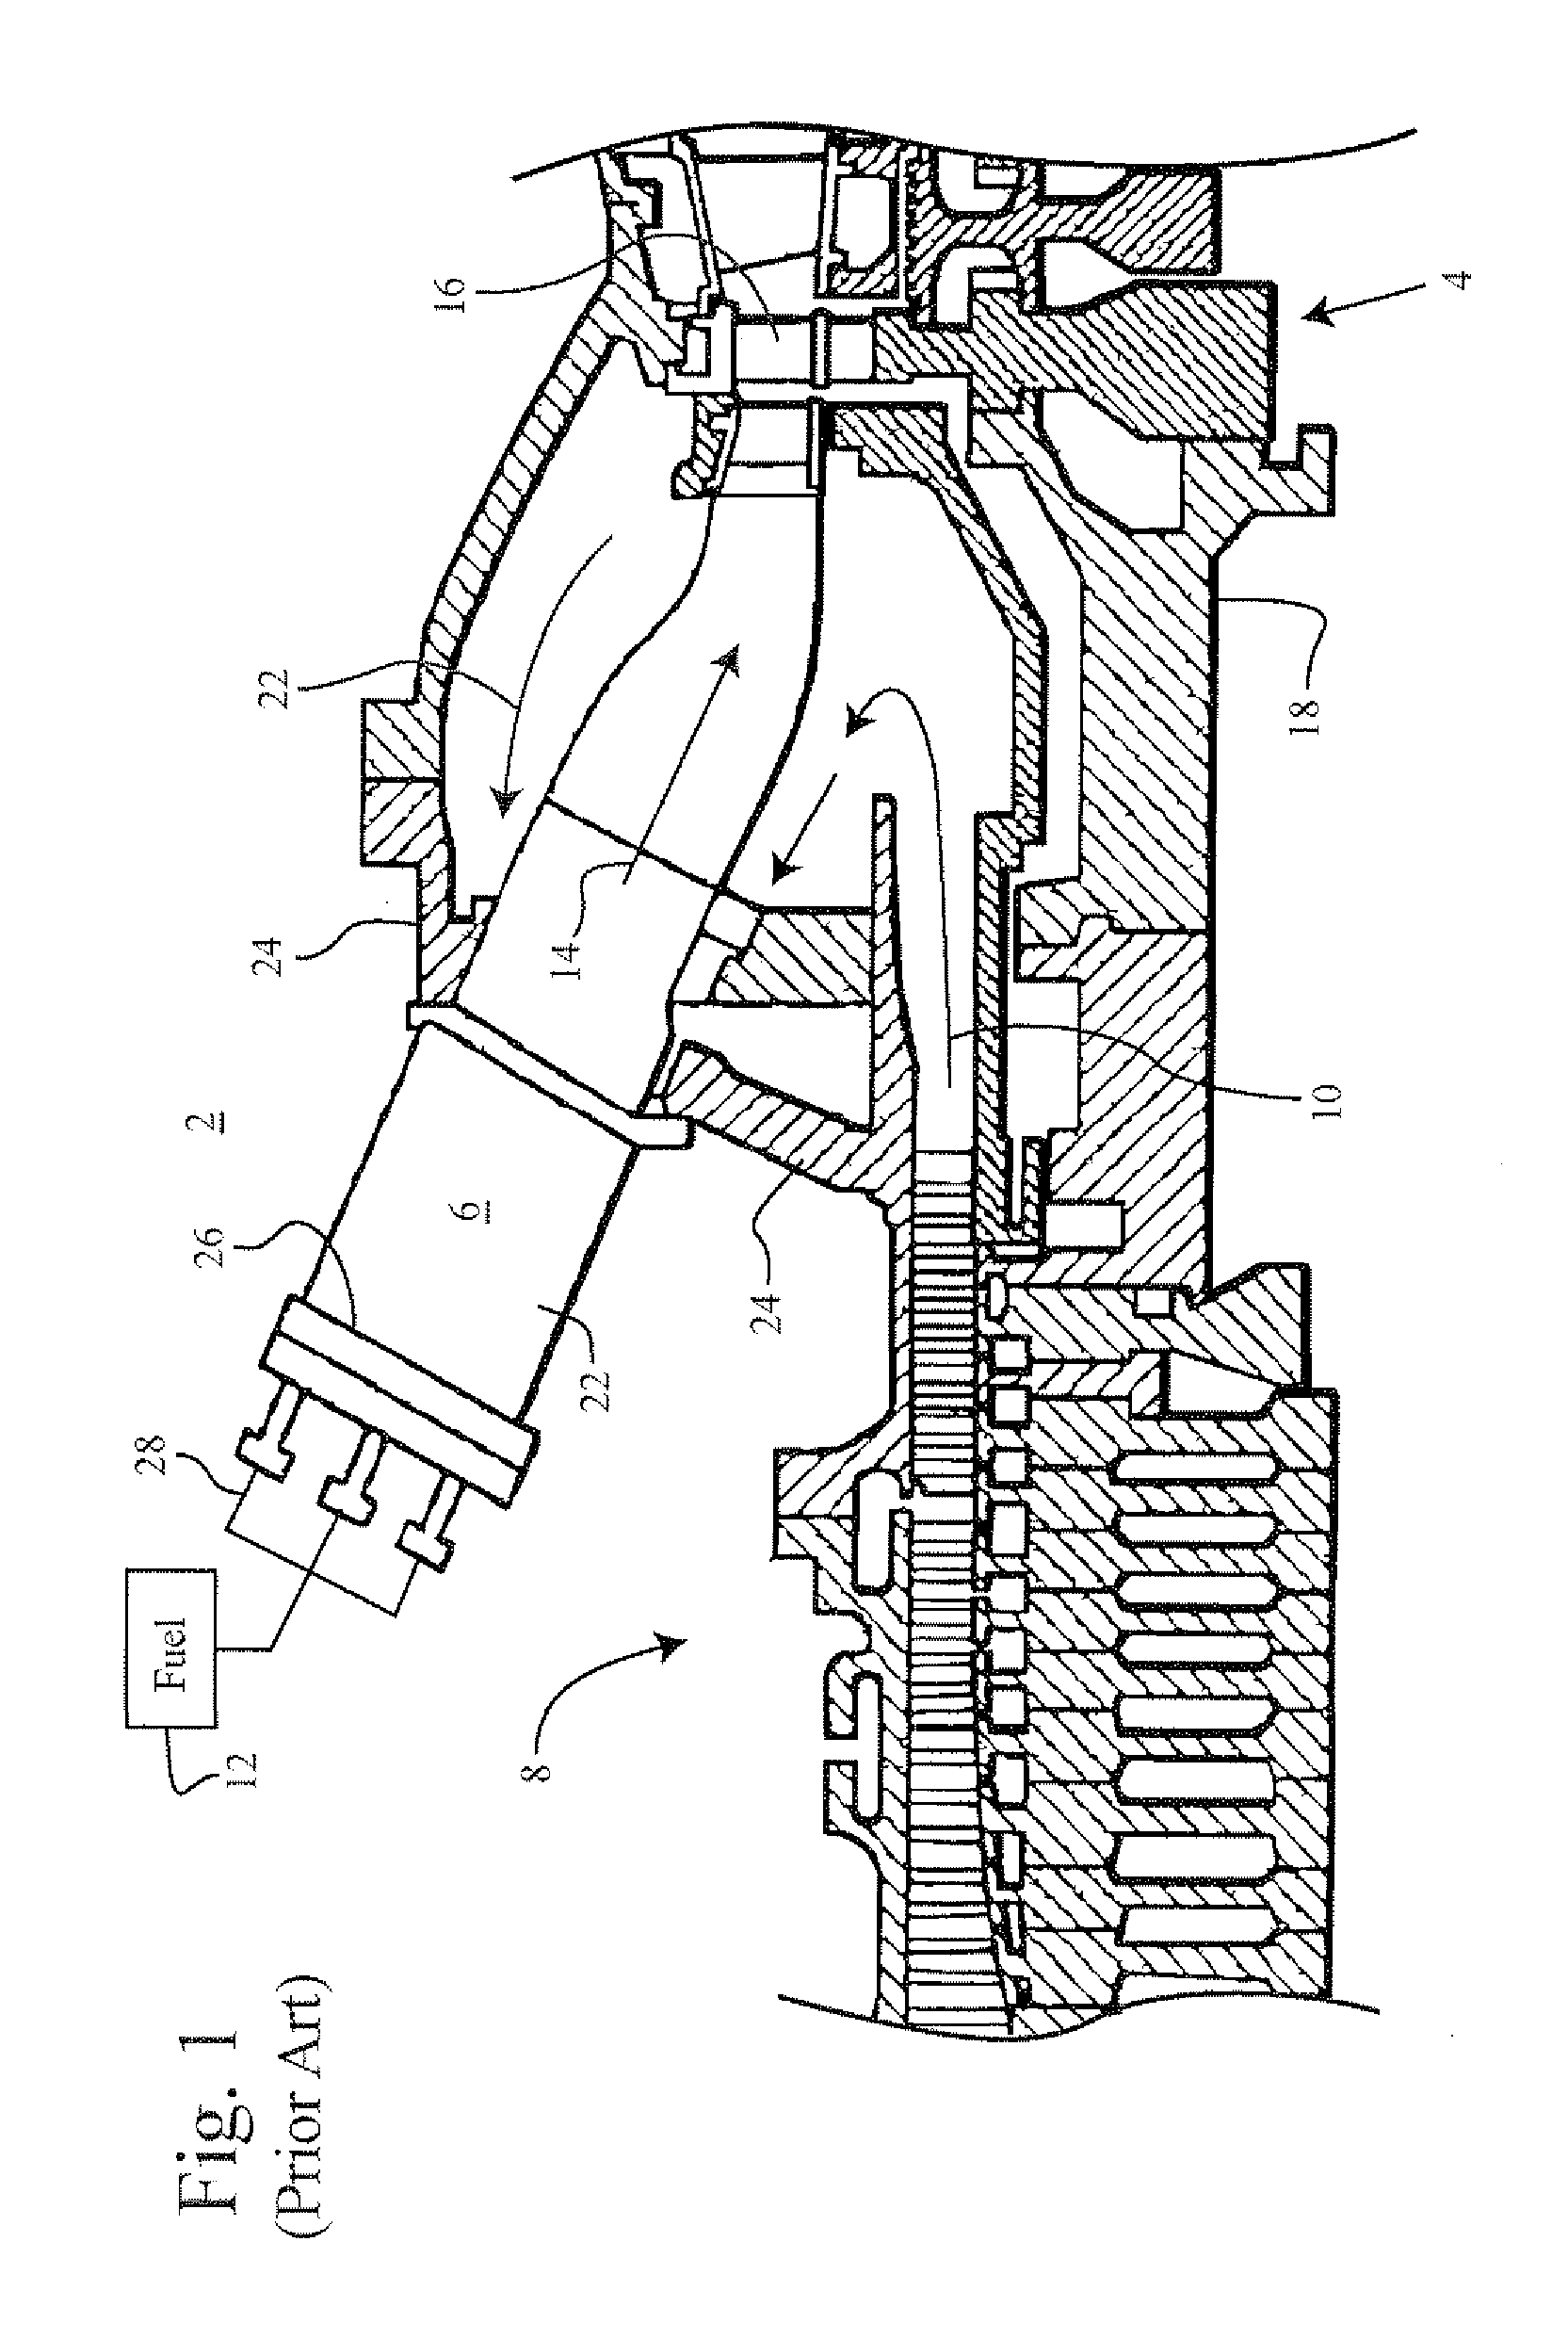 Turning guide for combustion fuel nozzle in gas turbine and method to turn fuel flow entering combustion chamber